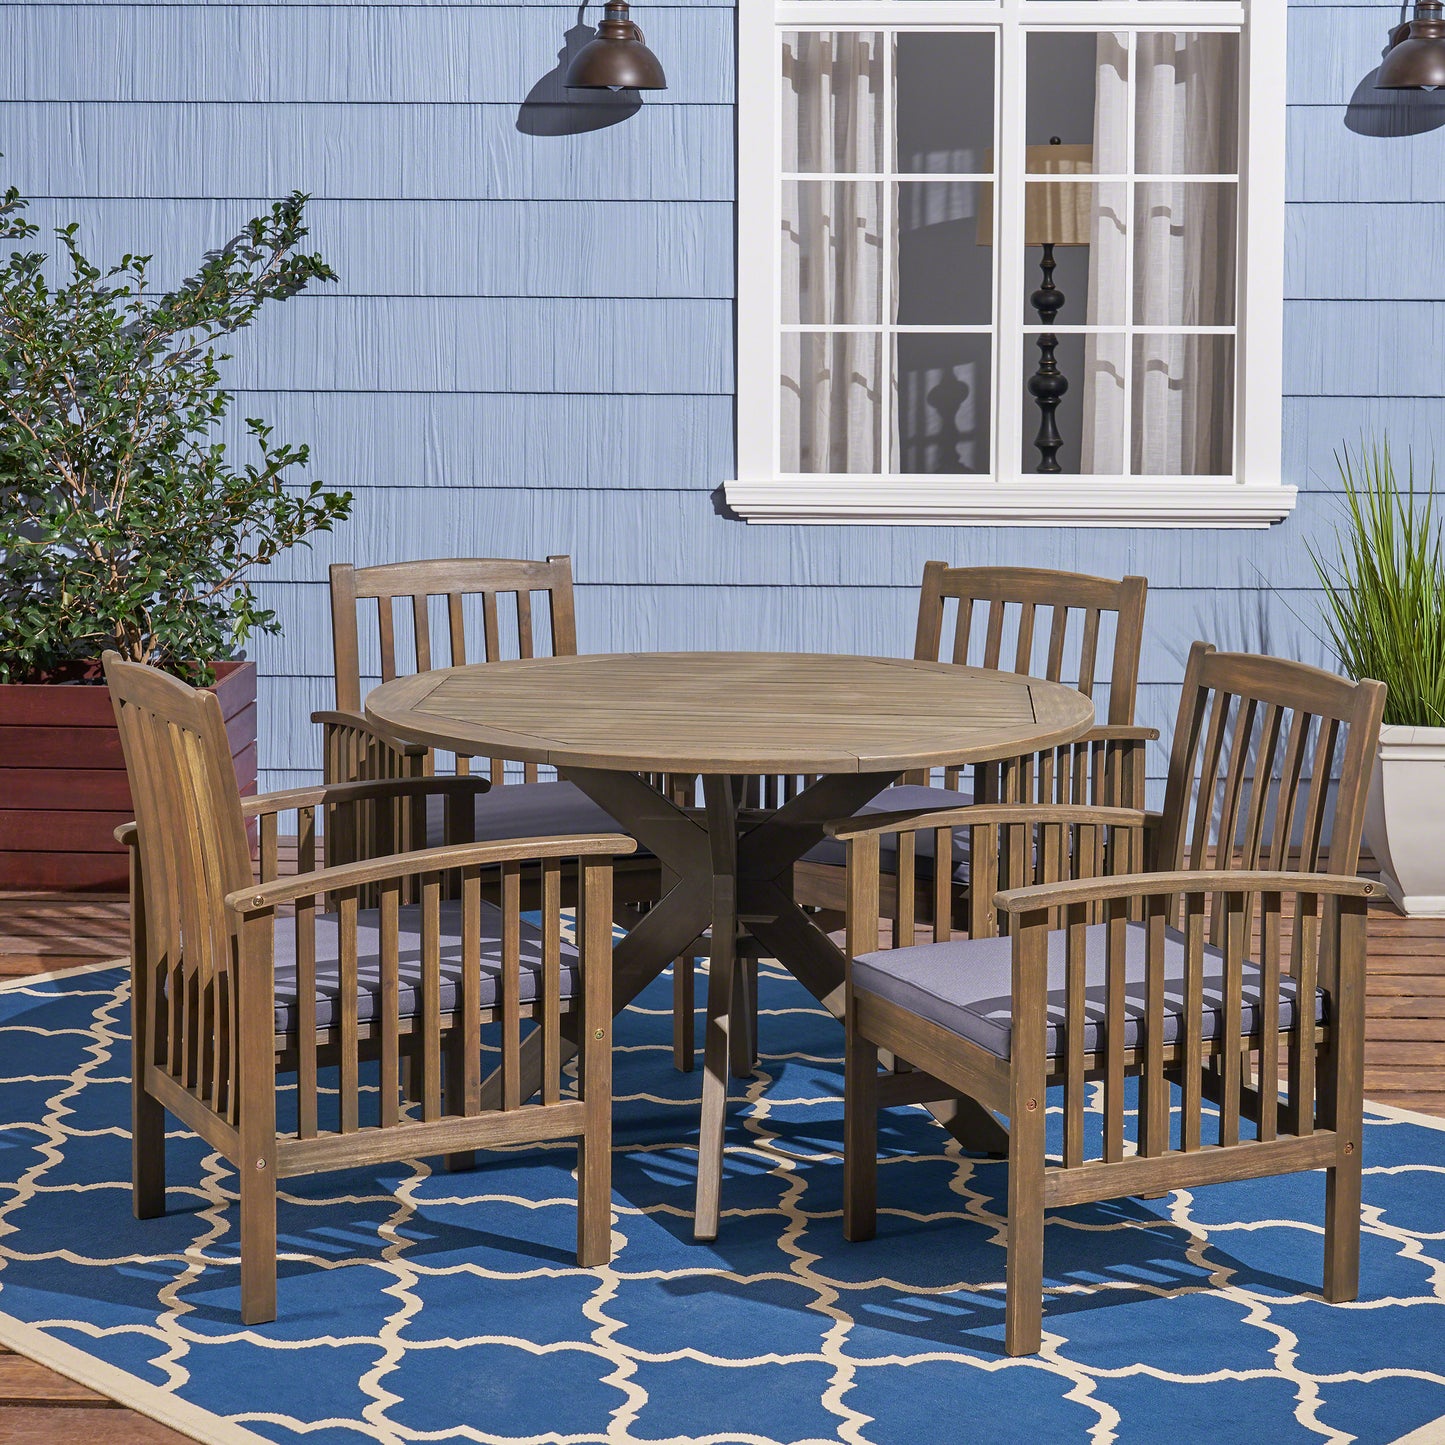 Phoenix Outdoor Acacia 4-Seater Dining Set with Cushions and 47" Round Table with X-Legs